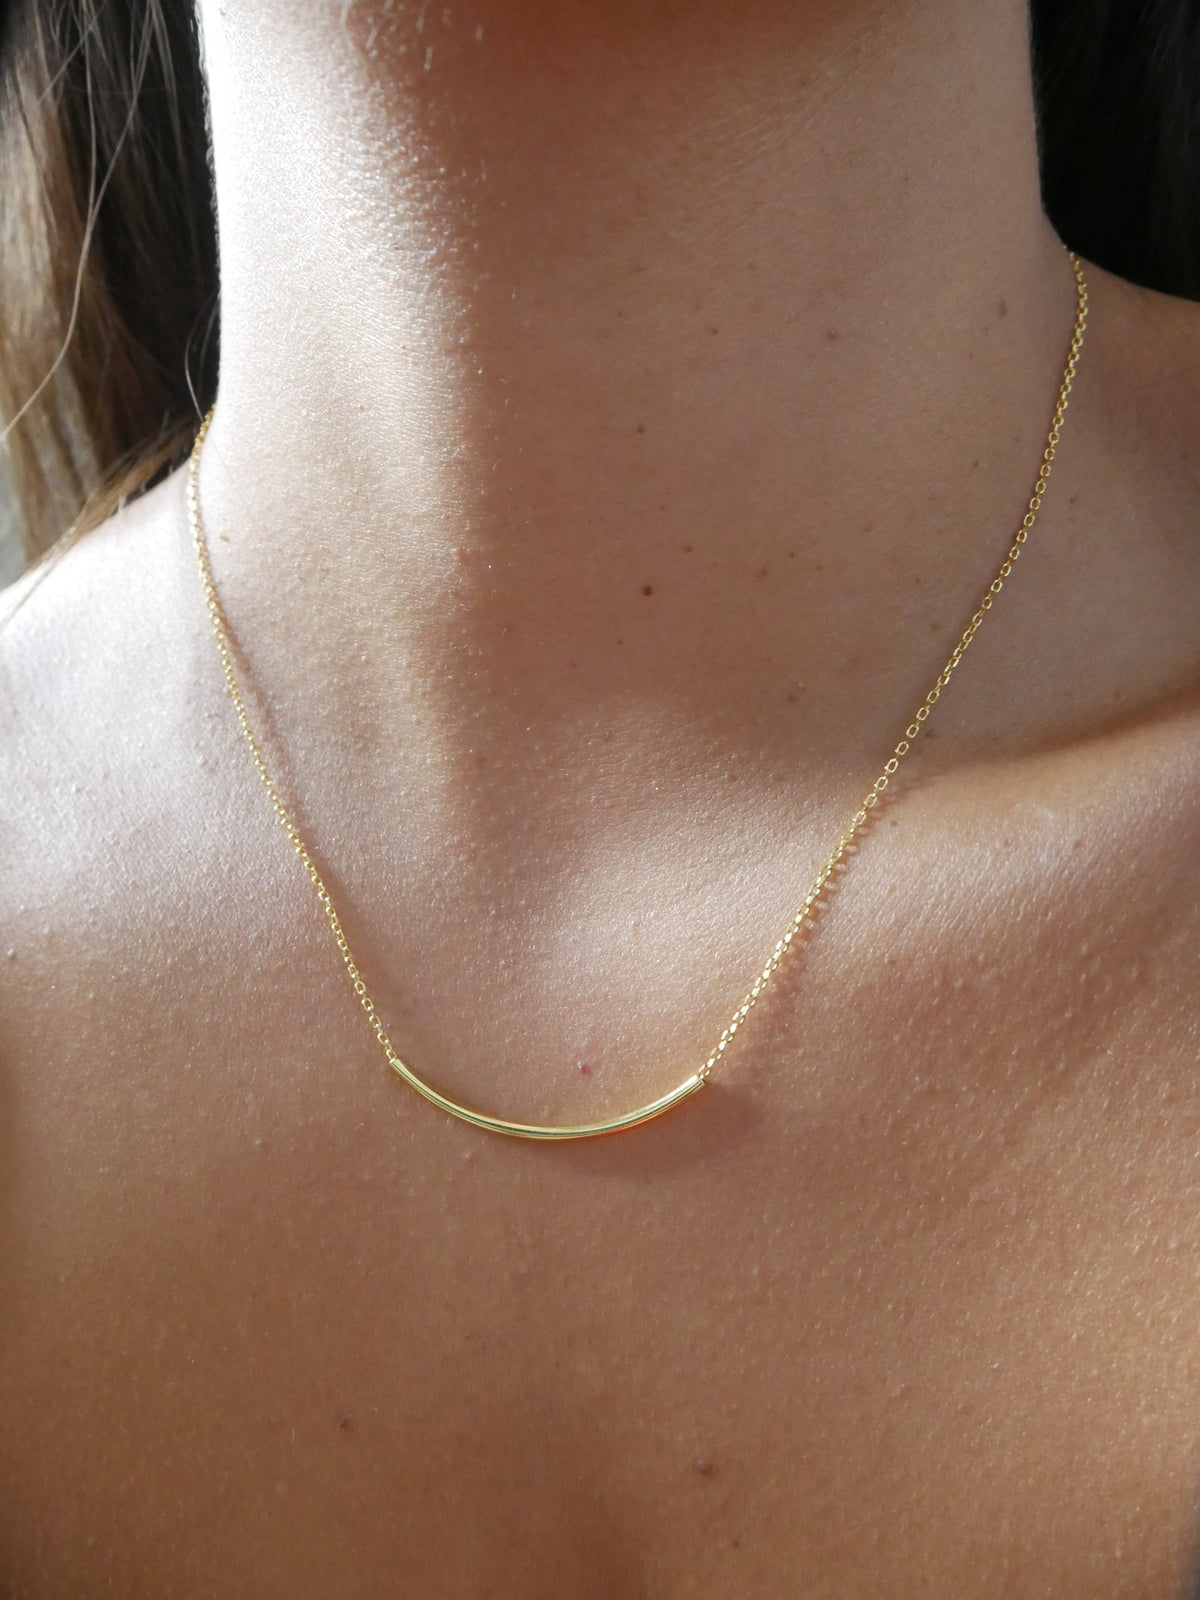 Minimalist Bar Daily .925 Sterling Silver Waterproof Necklace